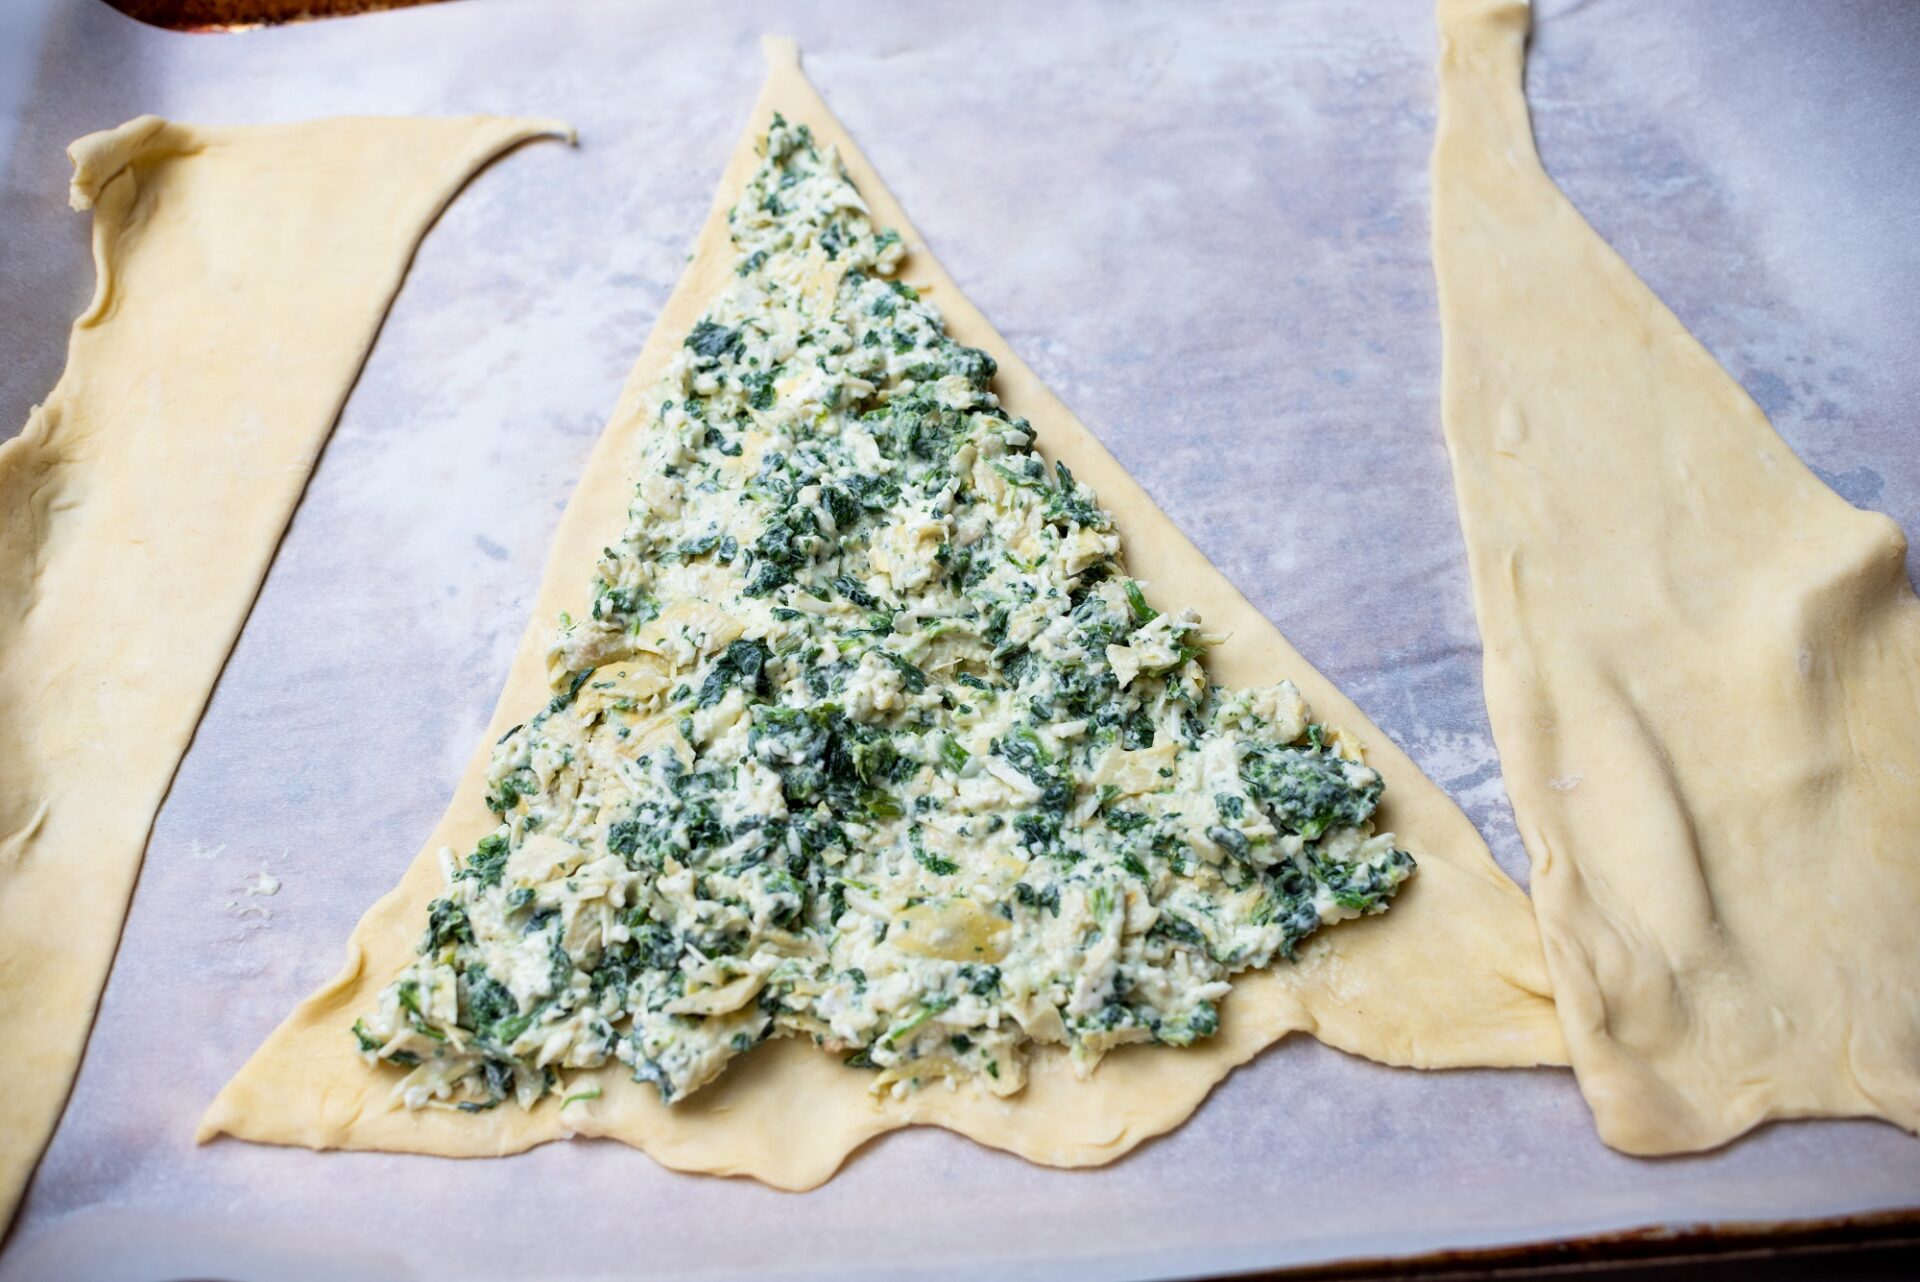 Adding spinach dip to a triangle of puff pastry.